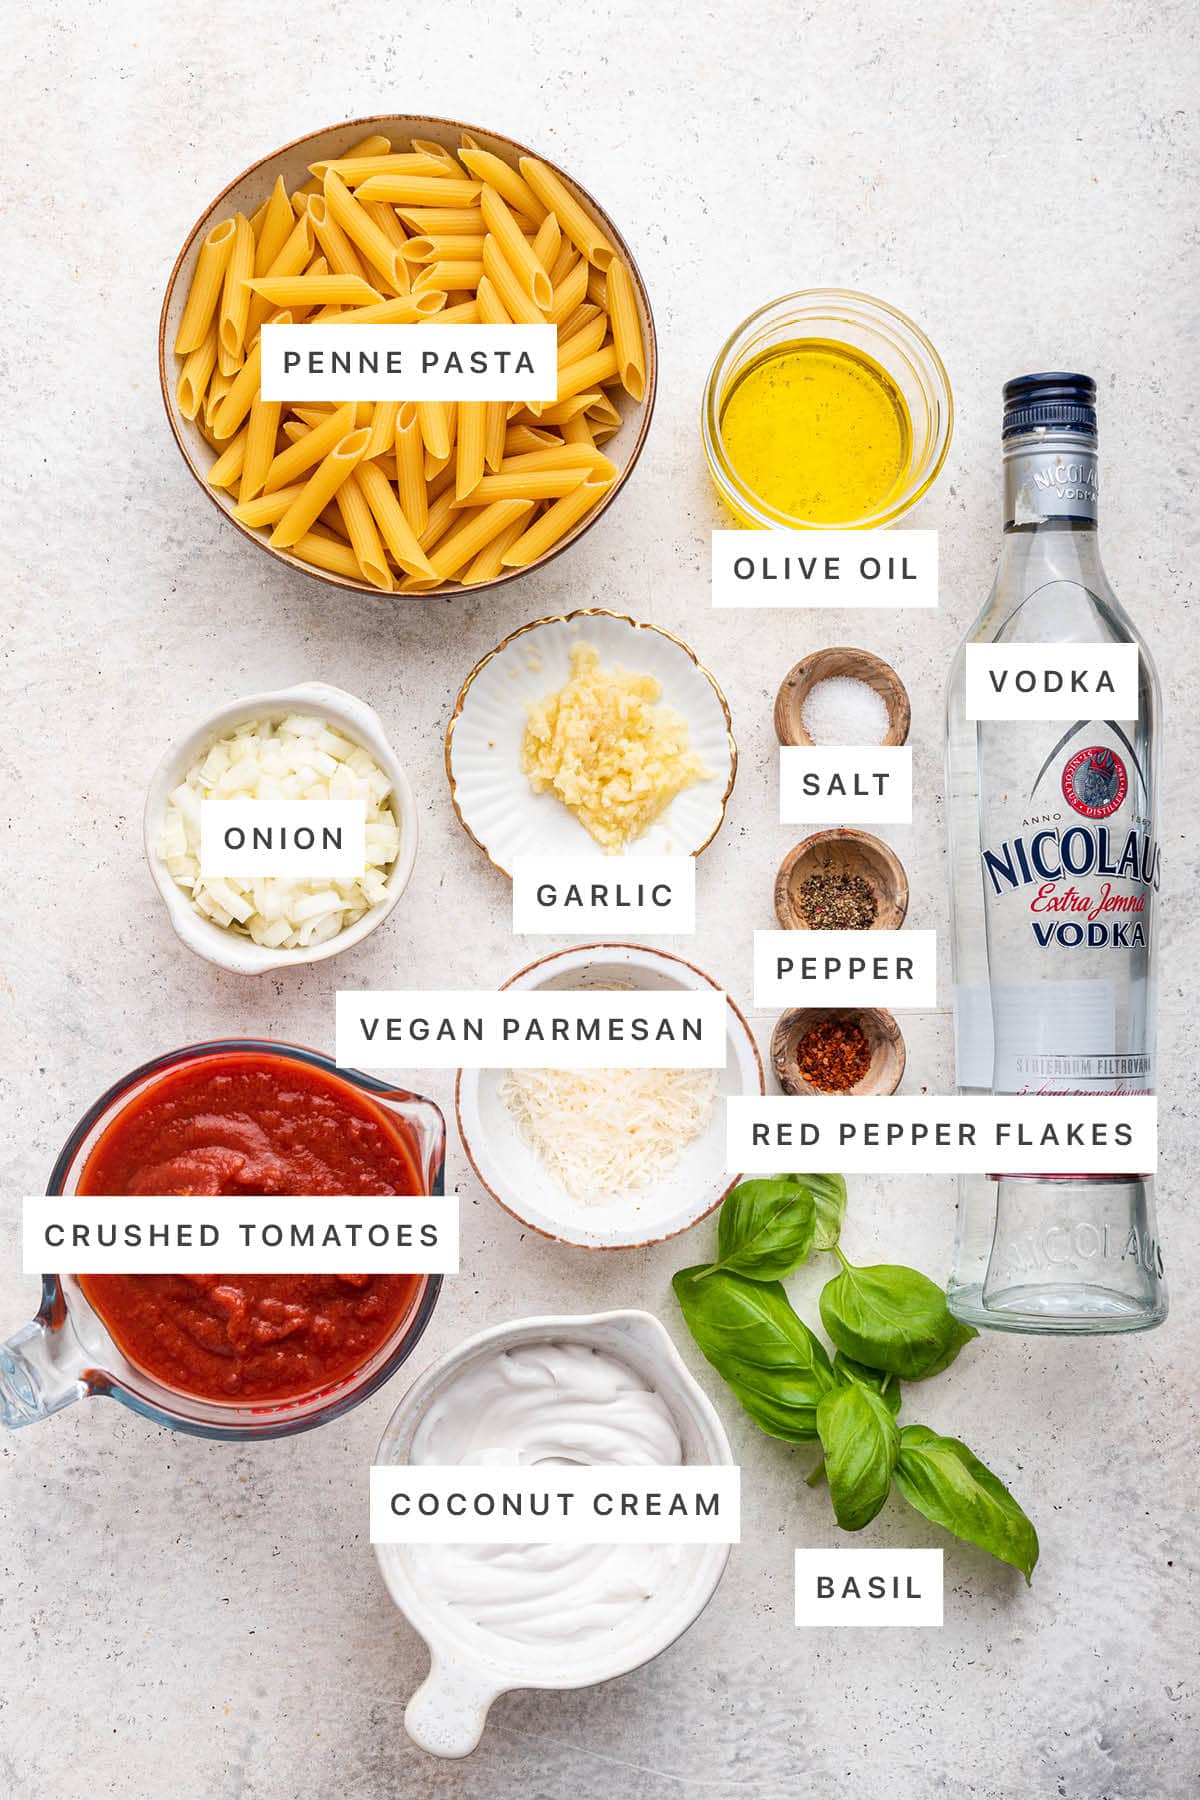 Ingredients measured out to make Penne alla Vodka: penne, olive oil, vodka, onion, garlic, salt, pepper, red pepper flakes, parmesan, crushed tomatoes, coconut cream and basil.